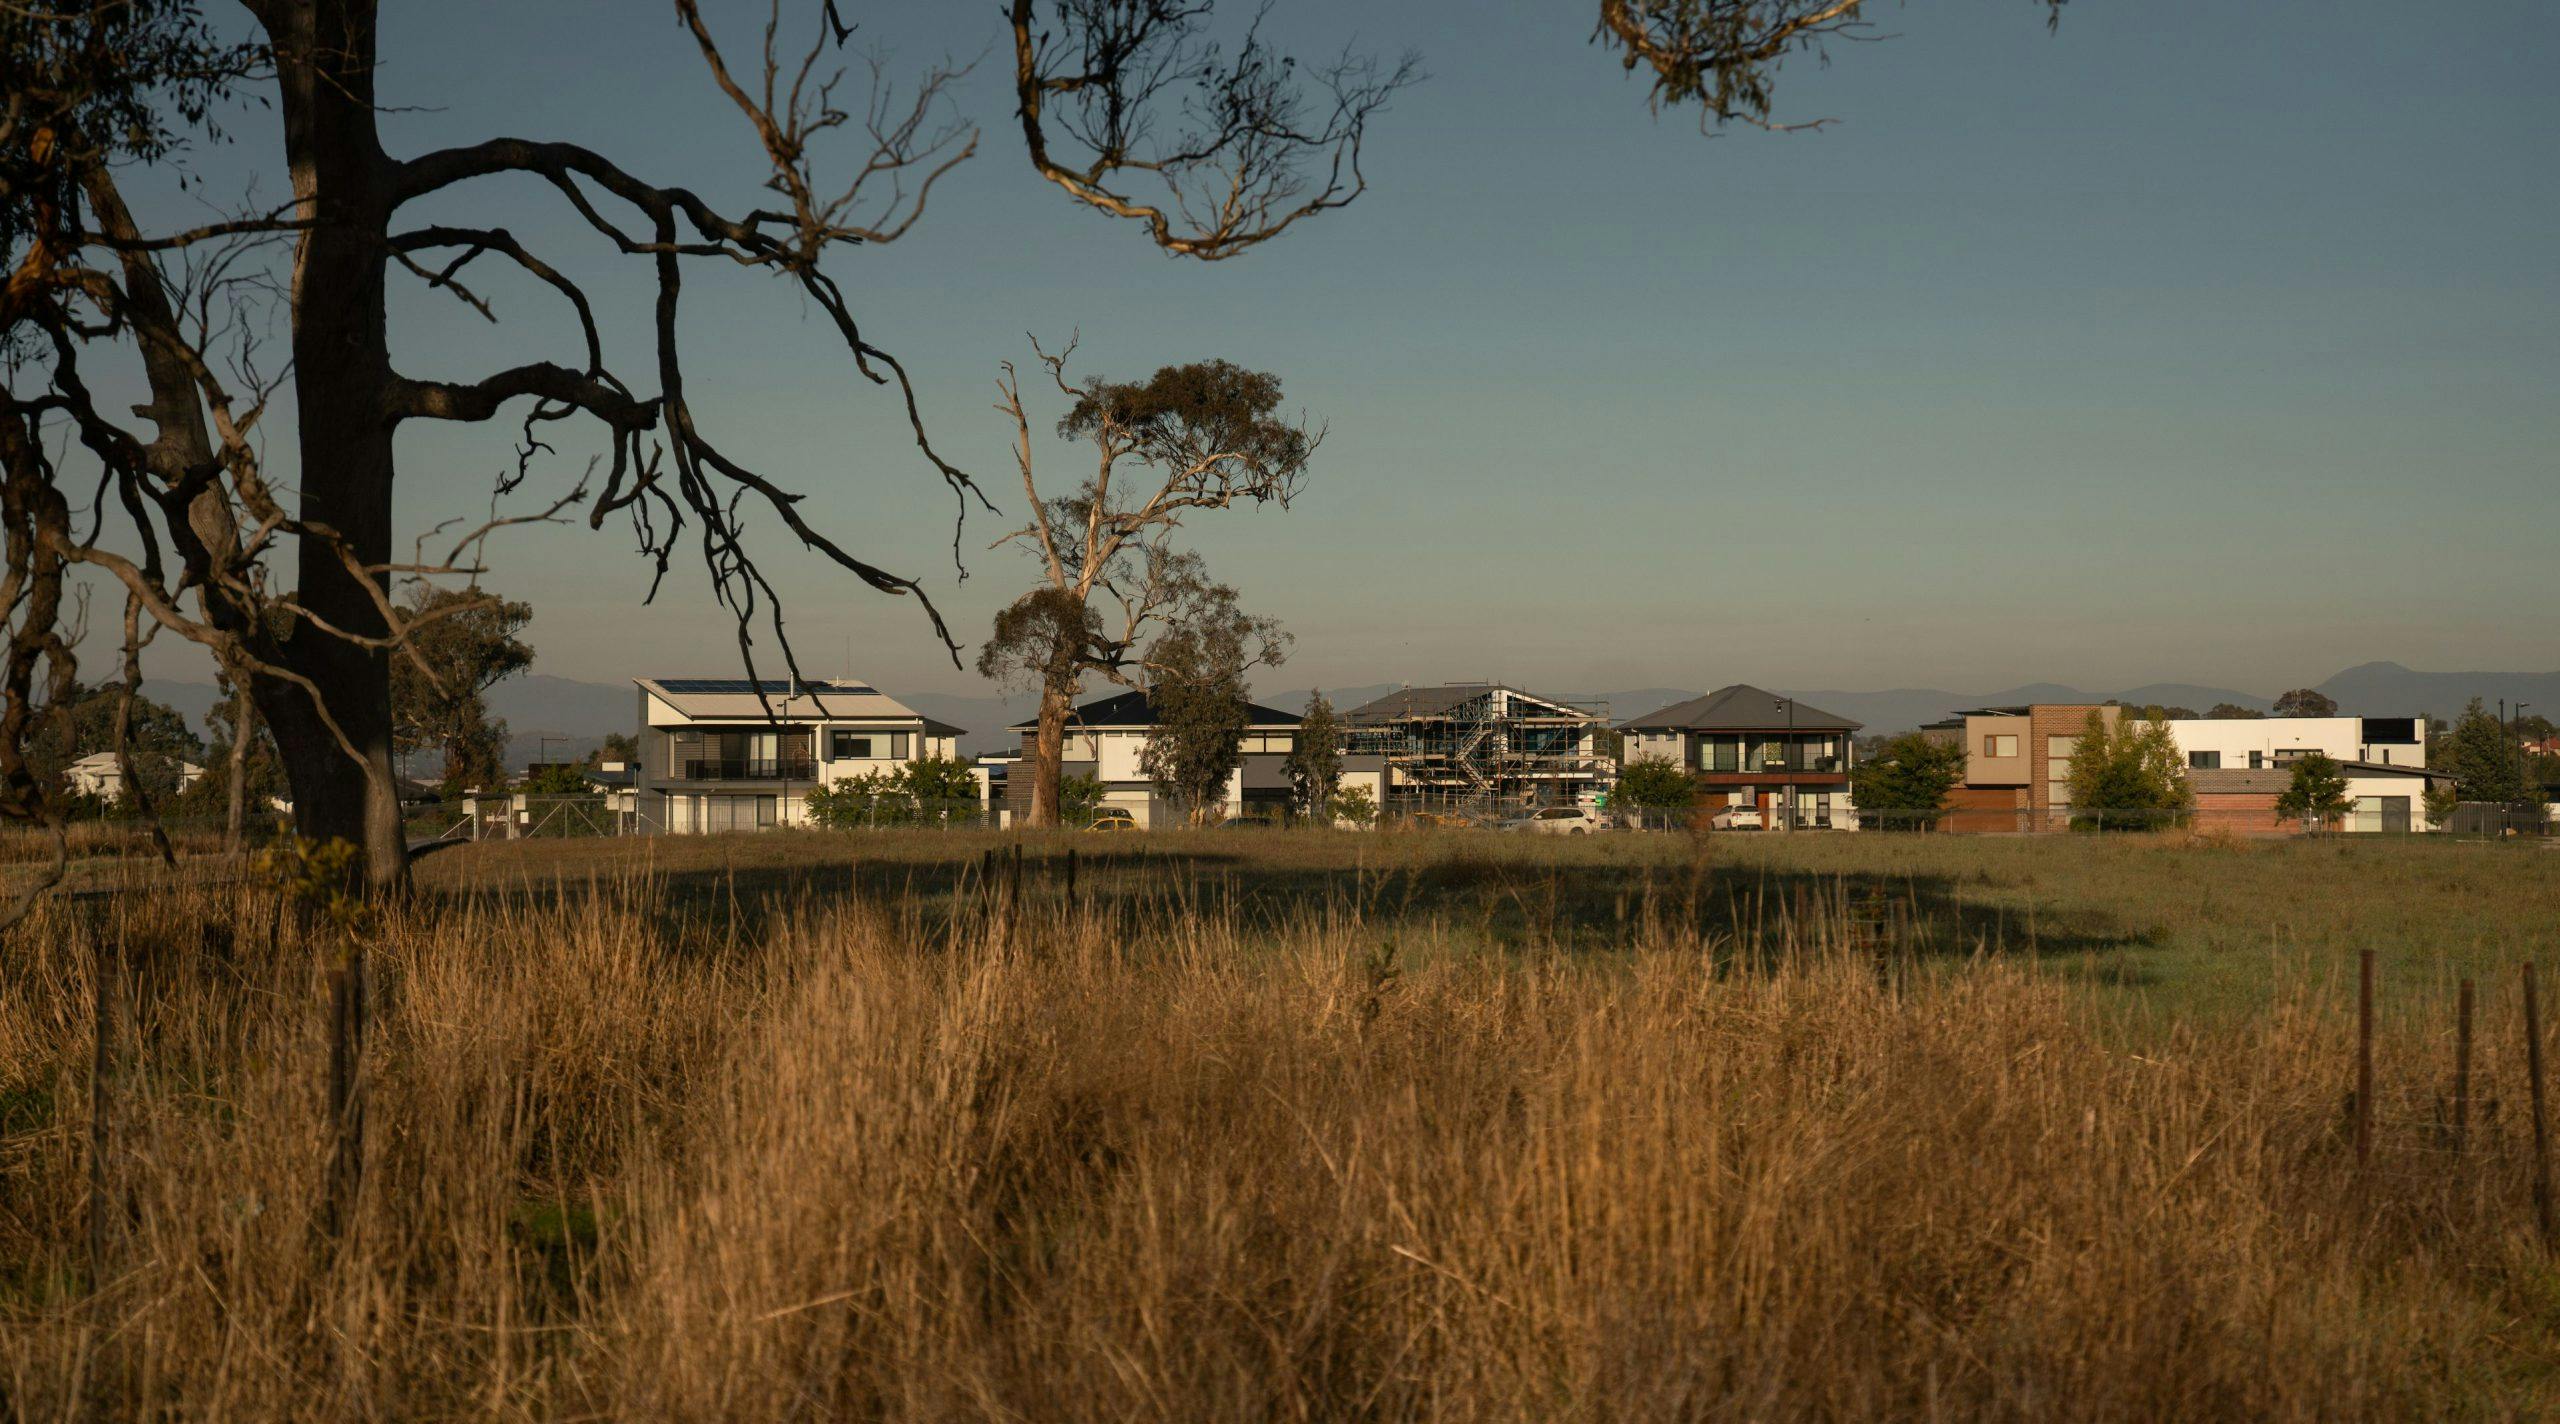 Houses in the suburb of Throsby seen on the other side of a grassy landscape with tall trees